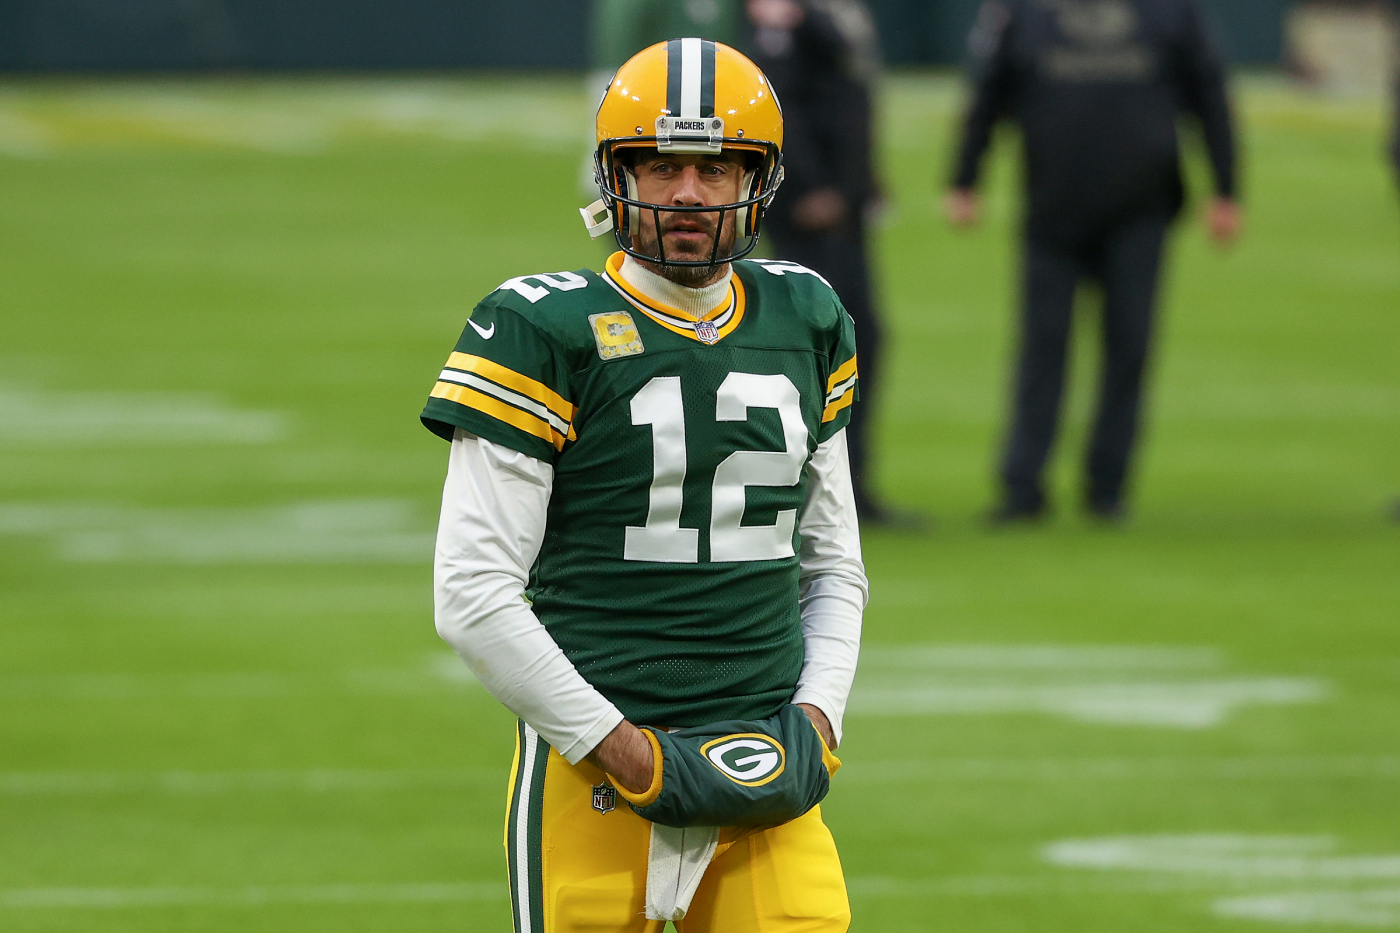 After the Green Bay Packers' recent loss, Marquez Valdes-Scantling received death threats. Aaron Rodgers now has a strong message.